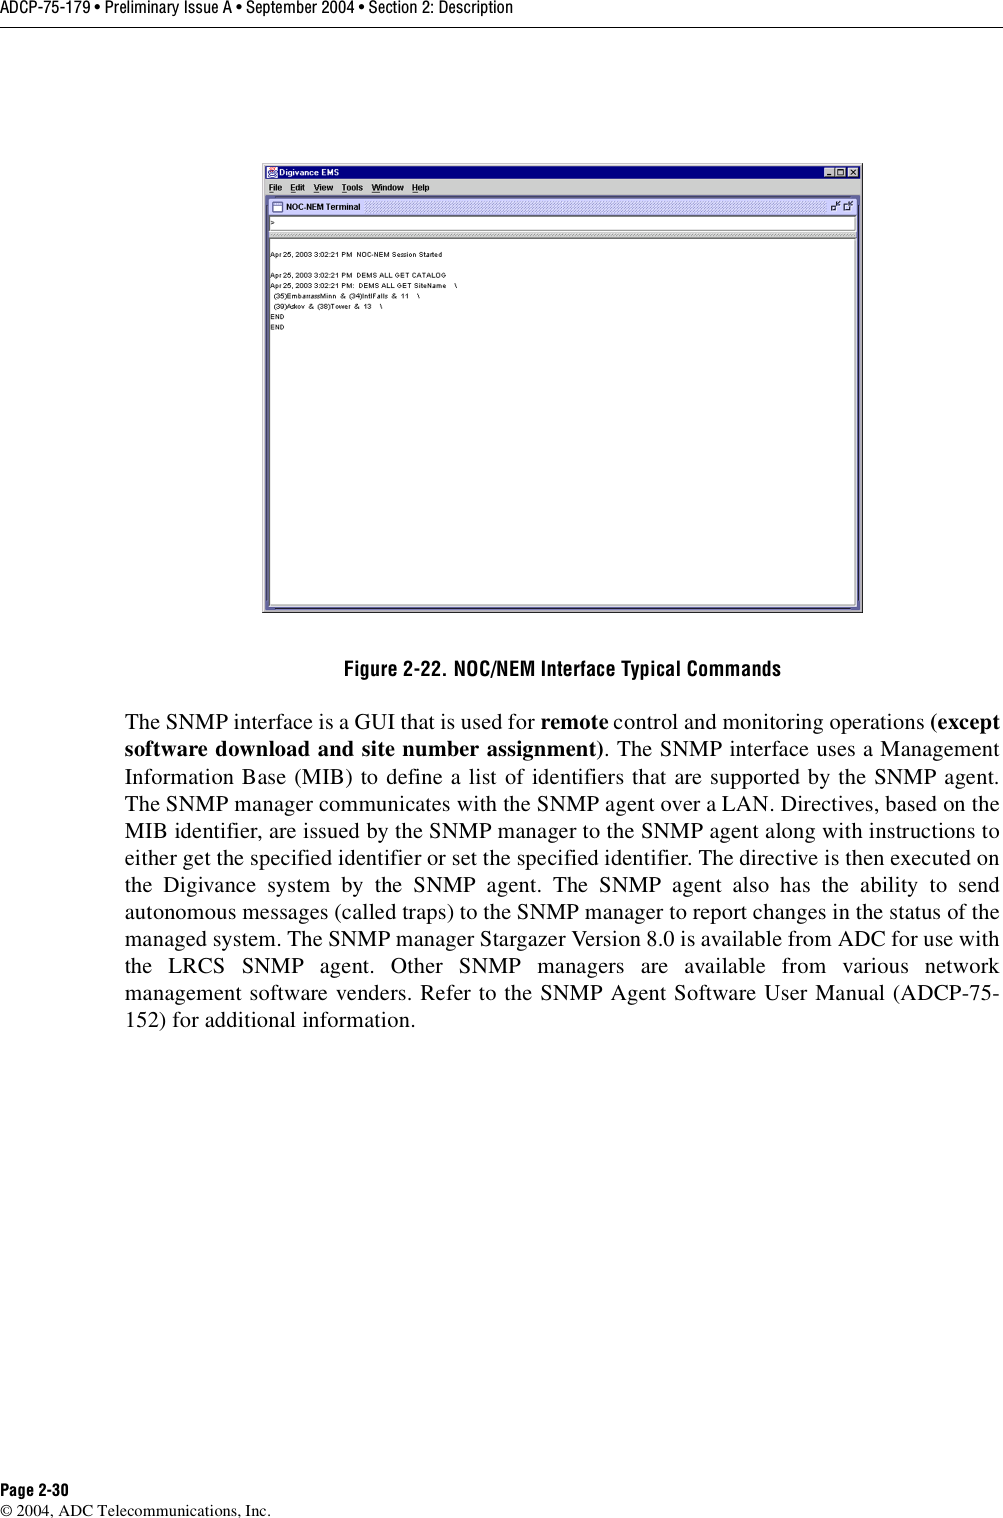 ADCP-75-179 • Preliminary Issue A • September 2004 • Section 2: DescriptionPage 2-30© 2004, ADC Telecommunications, Inc.Figure 2-22. NOC/NEM Interface Typical CommandsThe SNMP interface is a GUI that is used for remote control and monitoring operations (exceptsoftware download and site number assignment). The SNMP interface uses a ManagementInformation Base (MIB) to define a list of identifiers that are supported by the SNMP agent.The SNMP manager communicates with the SNMP agent over a LAN. Directives, based on theMIB identifier, are issued by the SNMP manager to the SNMP agent along with instructions toeither get the specified identifier or set the specified identifier. The directive is then executed onthe Digivance system by the SNMP agent. The SNMP agent also has the ability to sendautonomous messages (called traps) to the SNMP manager to report changes in the status of themanaged system. The SNMP manager Stargazer Version 8.0 is available from ADC for use withthe LRCS SNMP agent. Other SNMP managers are available from various networkmanagement software venders. Refer to the SNMP Agent Software User Manual (ADCP-75-152) for additional information. 